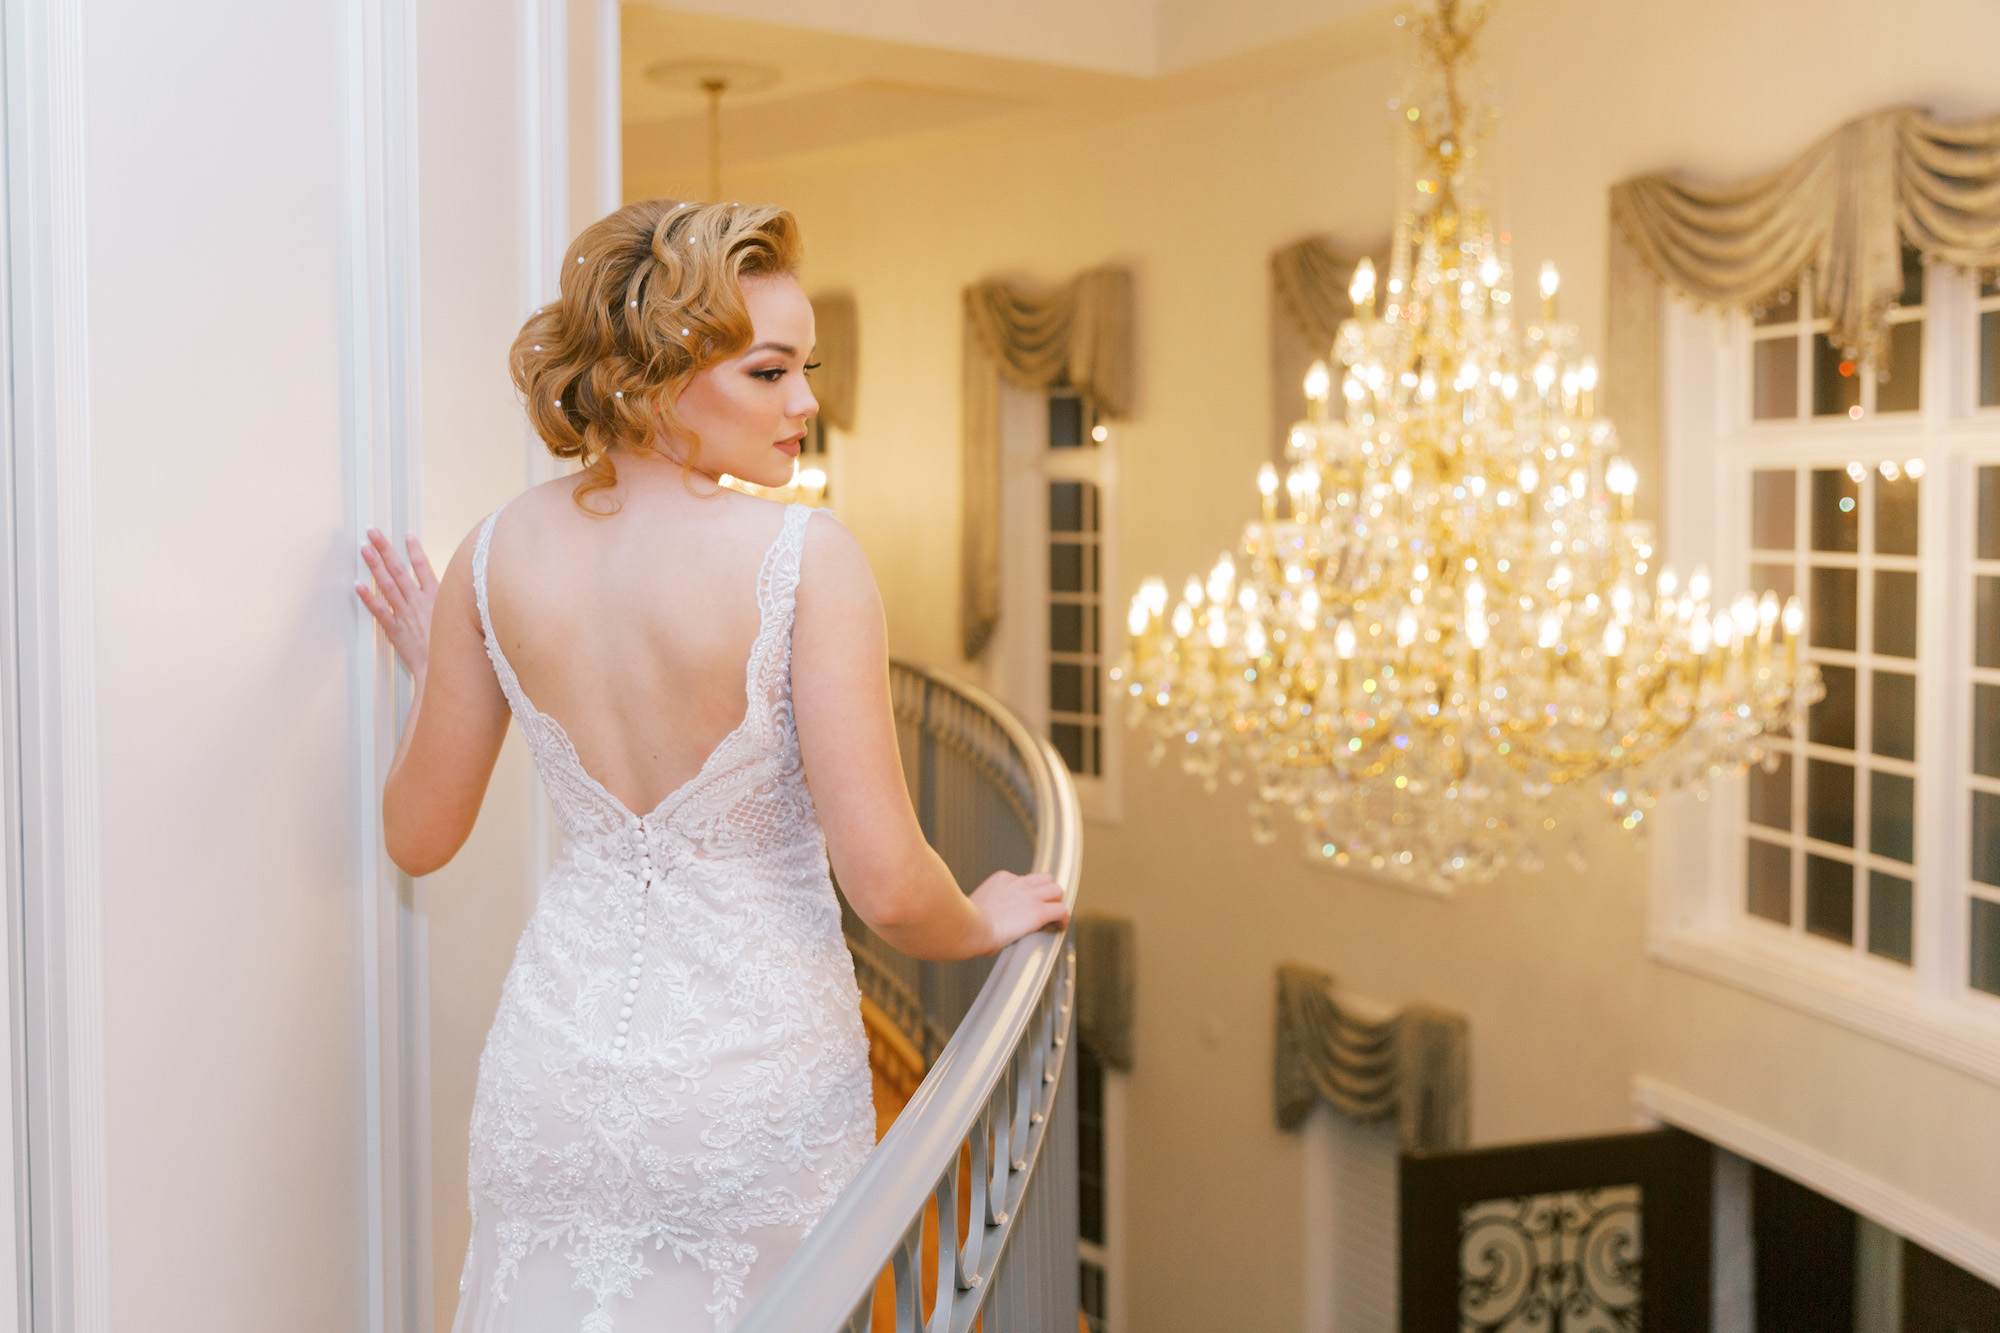 Vintage Old Hollywood Gatsby Inspired Bride In Front of Chandelier | Tampa Bay Wedding Hair and Makeup Artist Femme Akoi Beauty Studio | Tarpon Springs Wedding Venue The Whitehurst Gallery